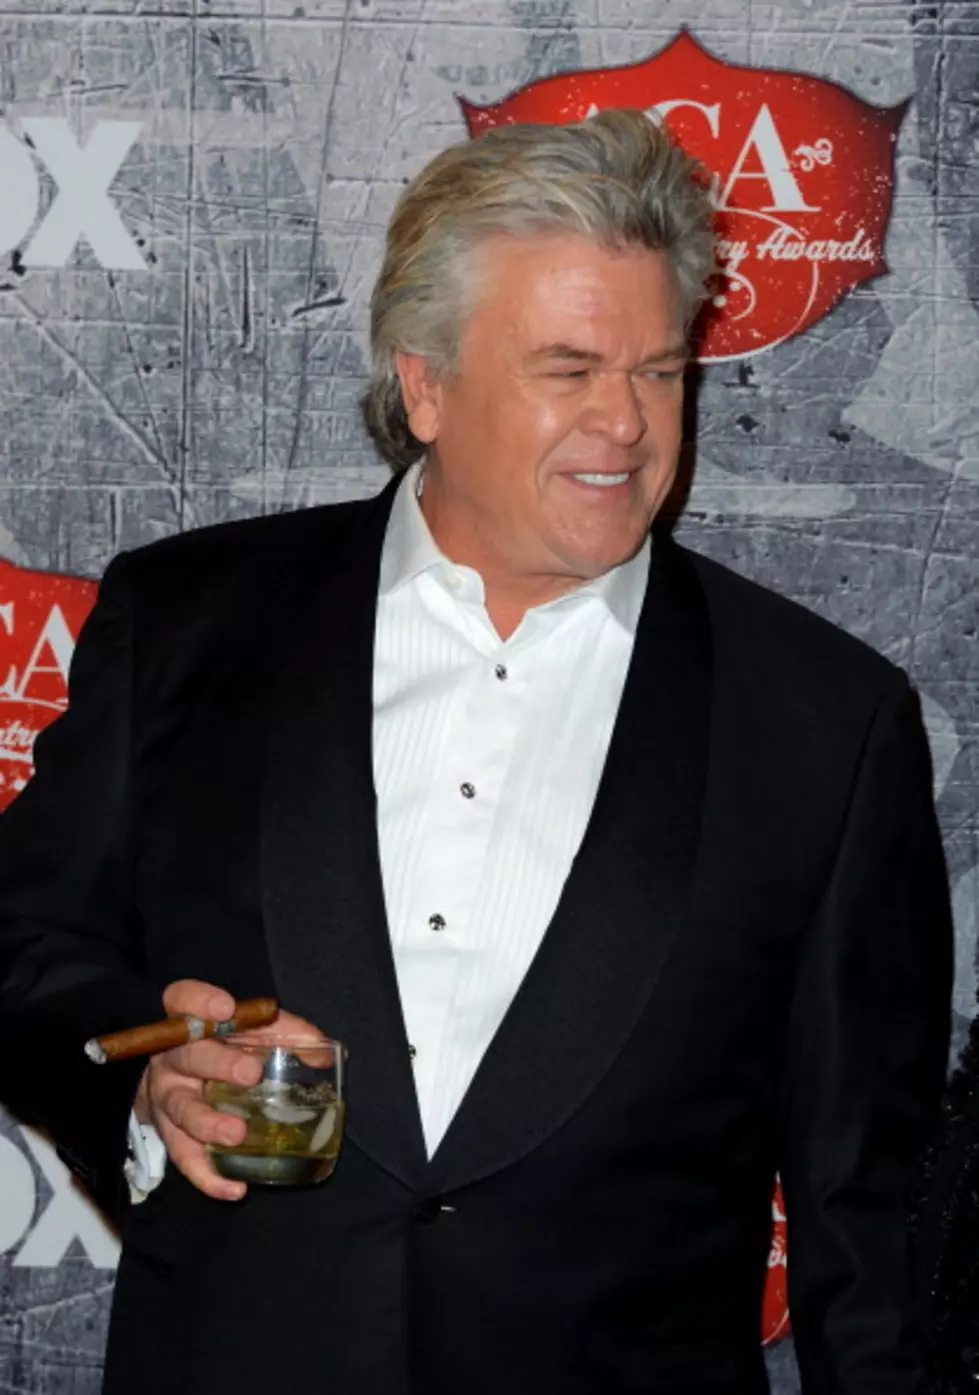 Weekend Events for Kiss Country July 12-14: Ron White, Farmers Markets, Arts and Crafts Show and more